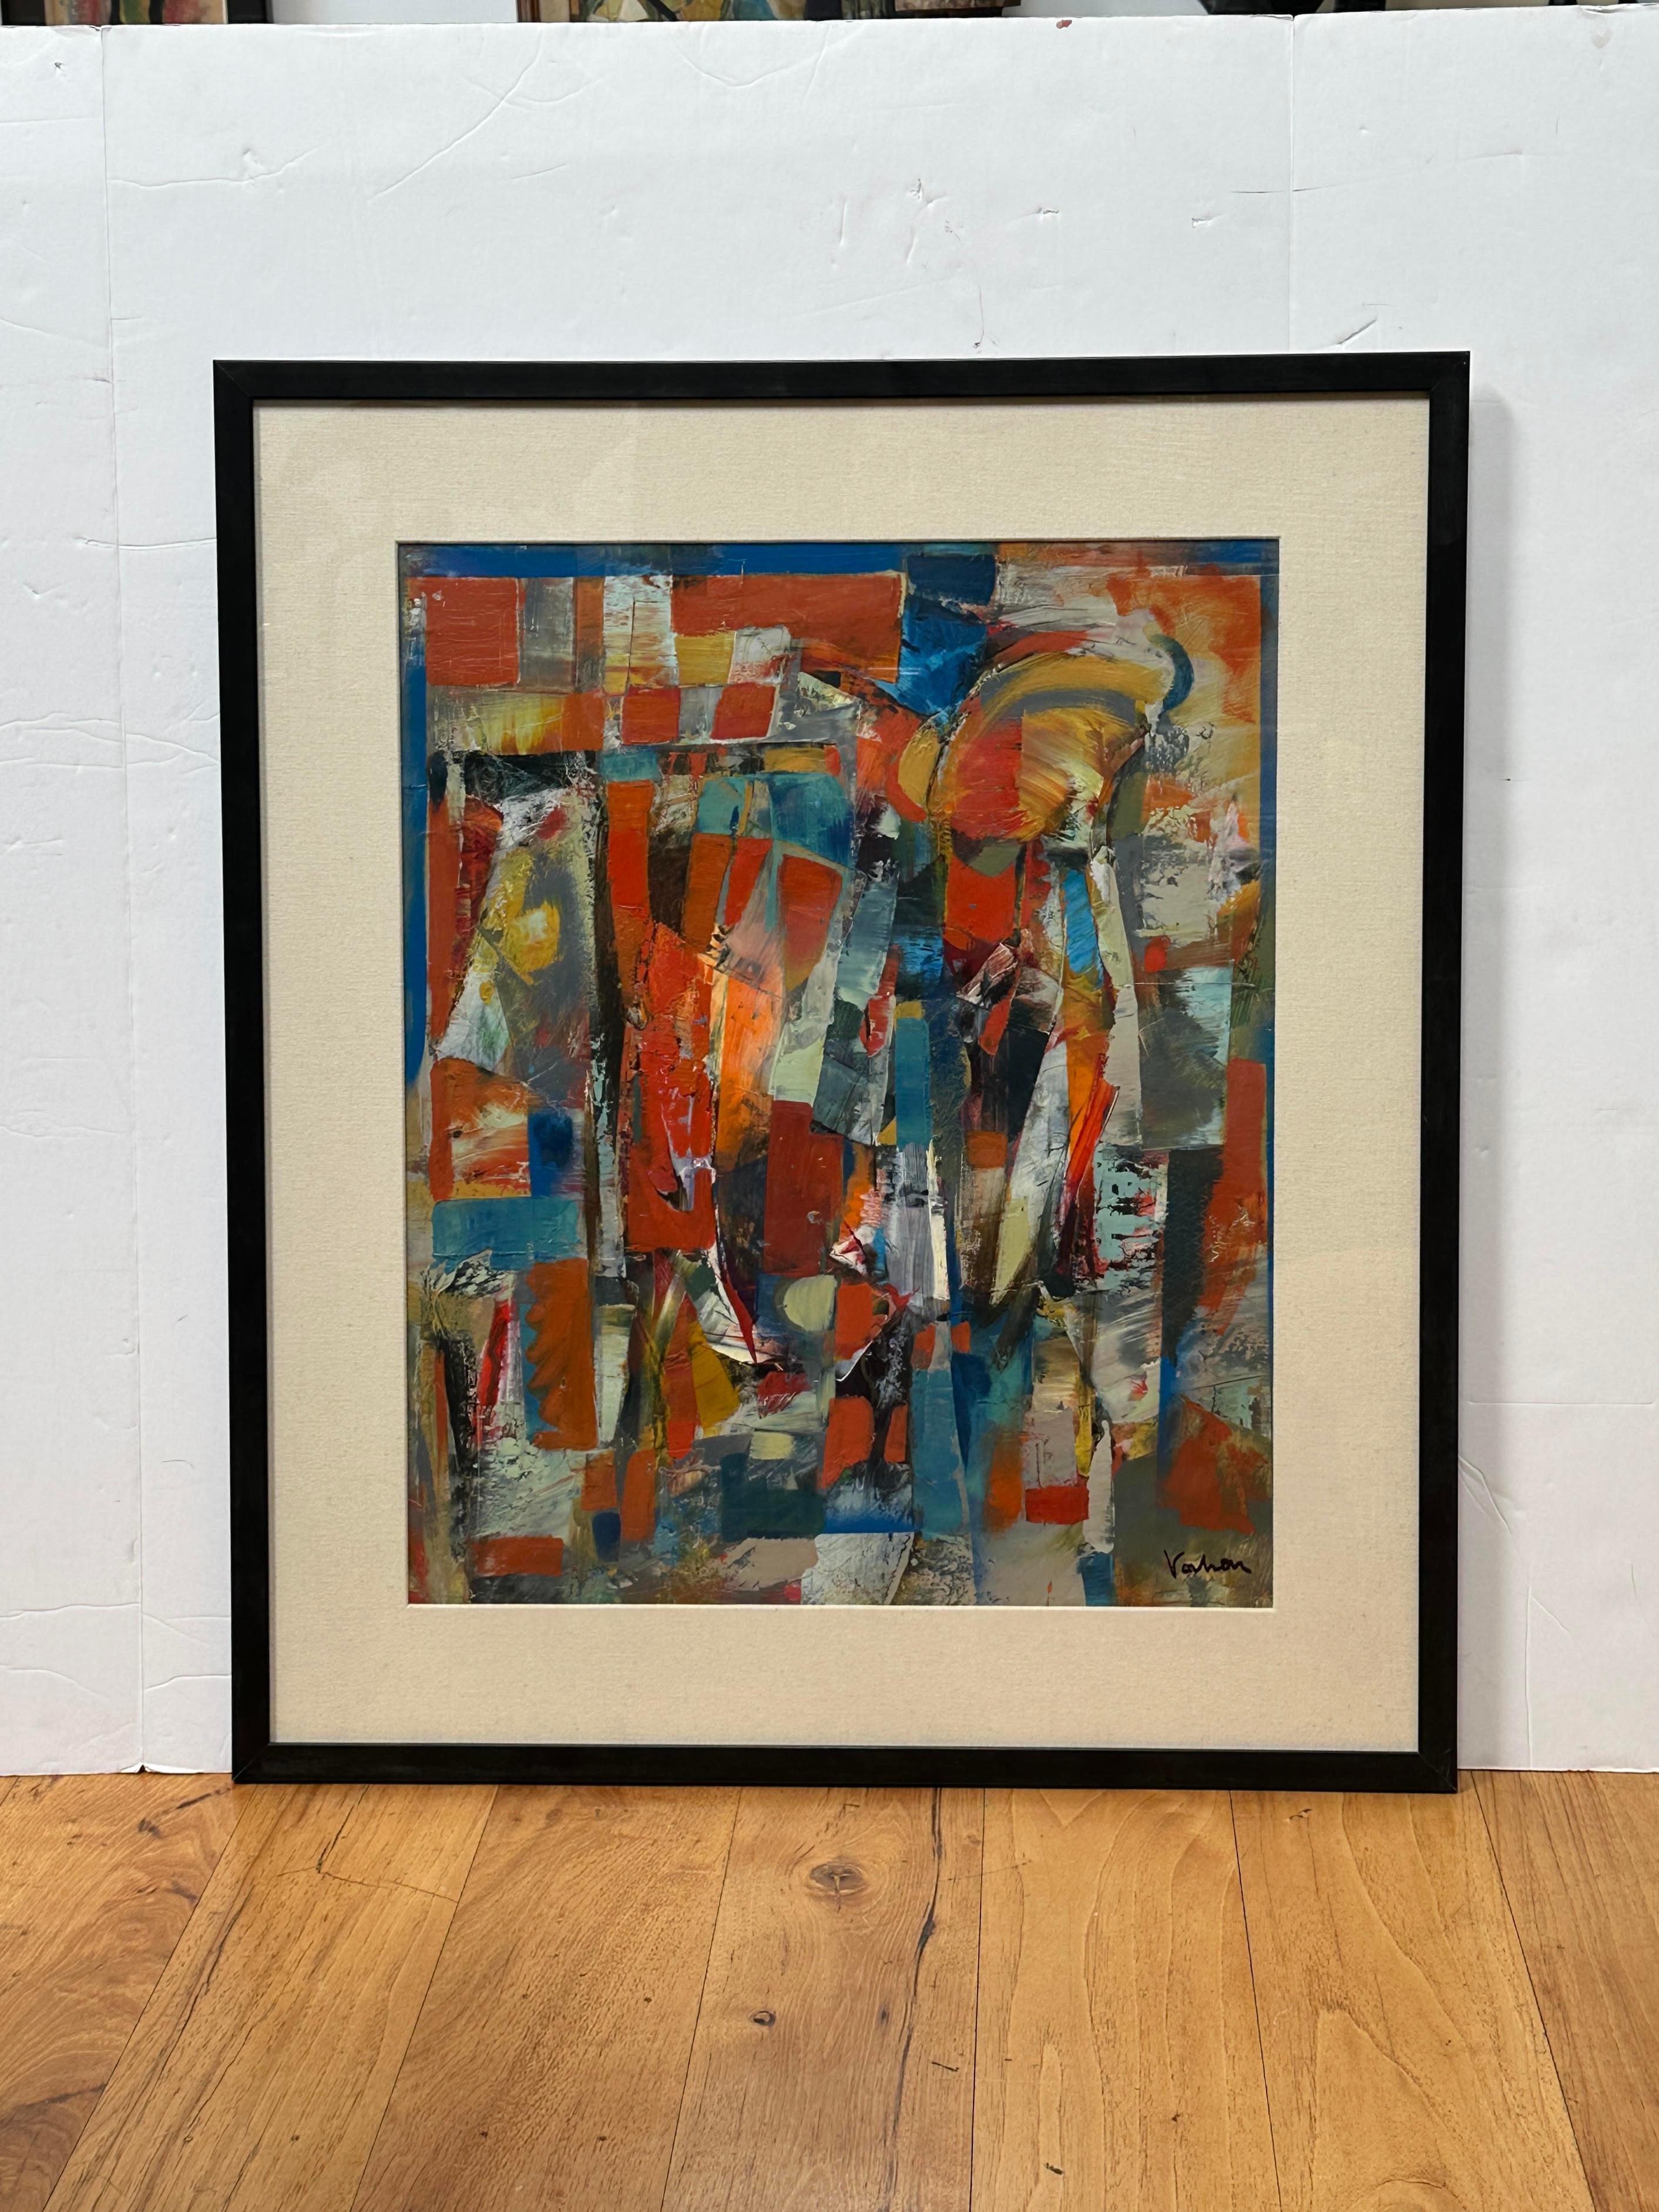 In this abstract painting marked by broad brushstrokes, vertical and rectangular forms, bold colors - an explosion of red, blue, and orange - the presence of a breakthrough of yellow light so powerful that it splashes all over the canvas and beyond.